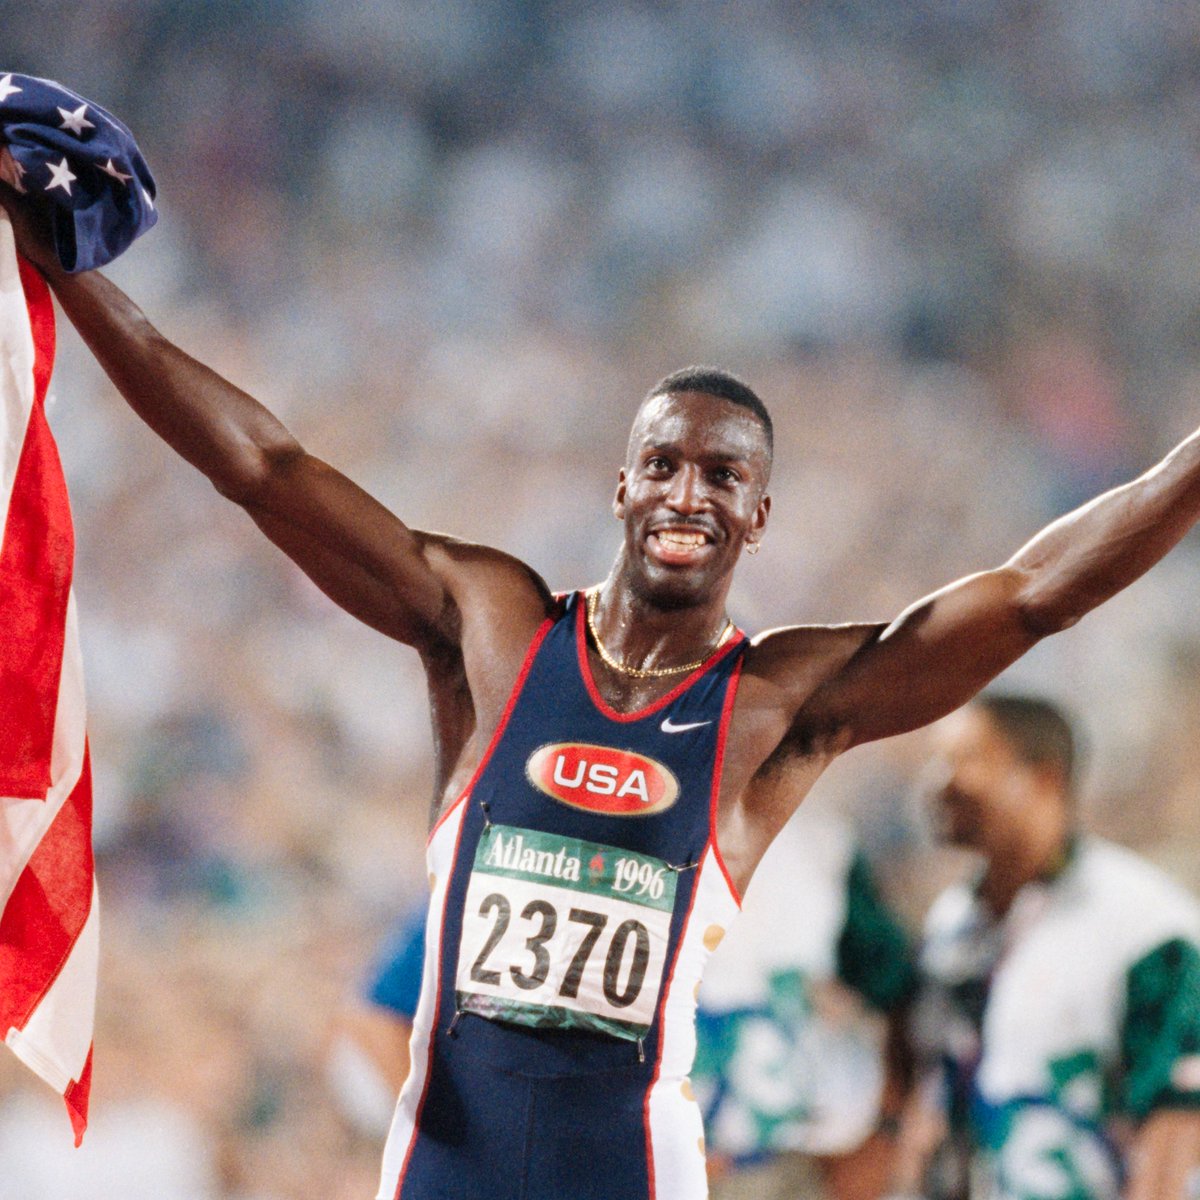 .@MJGold, one of the greatest sprinters of all time, is partnering with @WinnersAlliance to develop a new track league that aims to better engage existing fans by providing a TV-friendly product to promote the sport’s biggest stars and draw new audiences Read ➡️